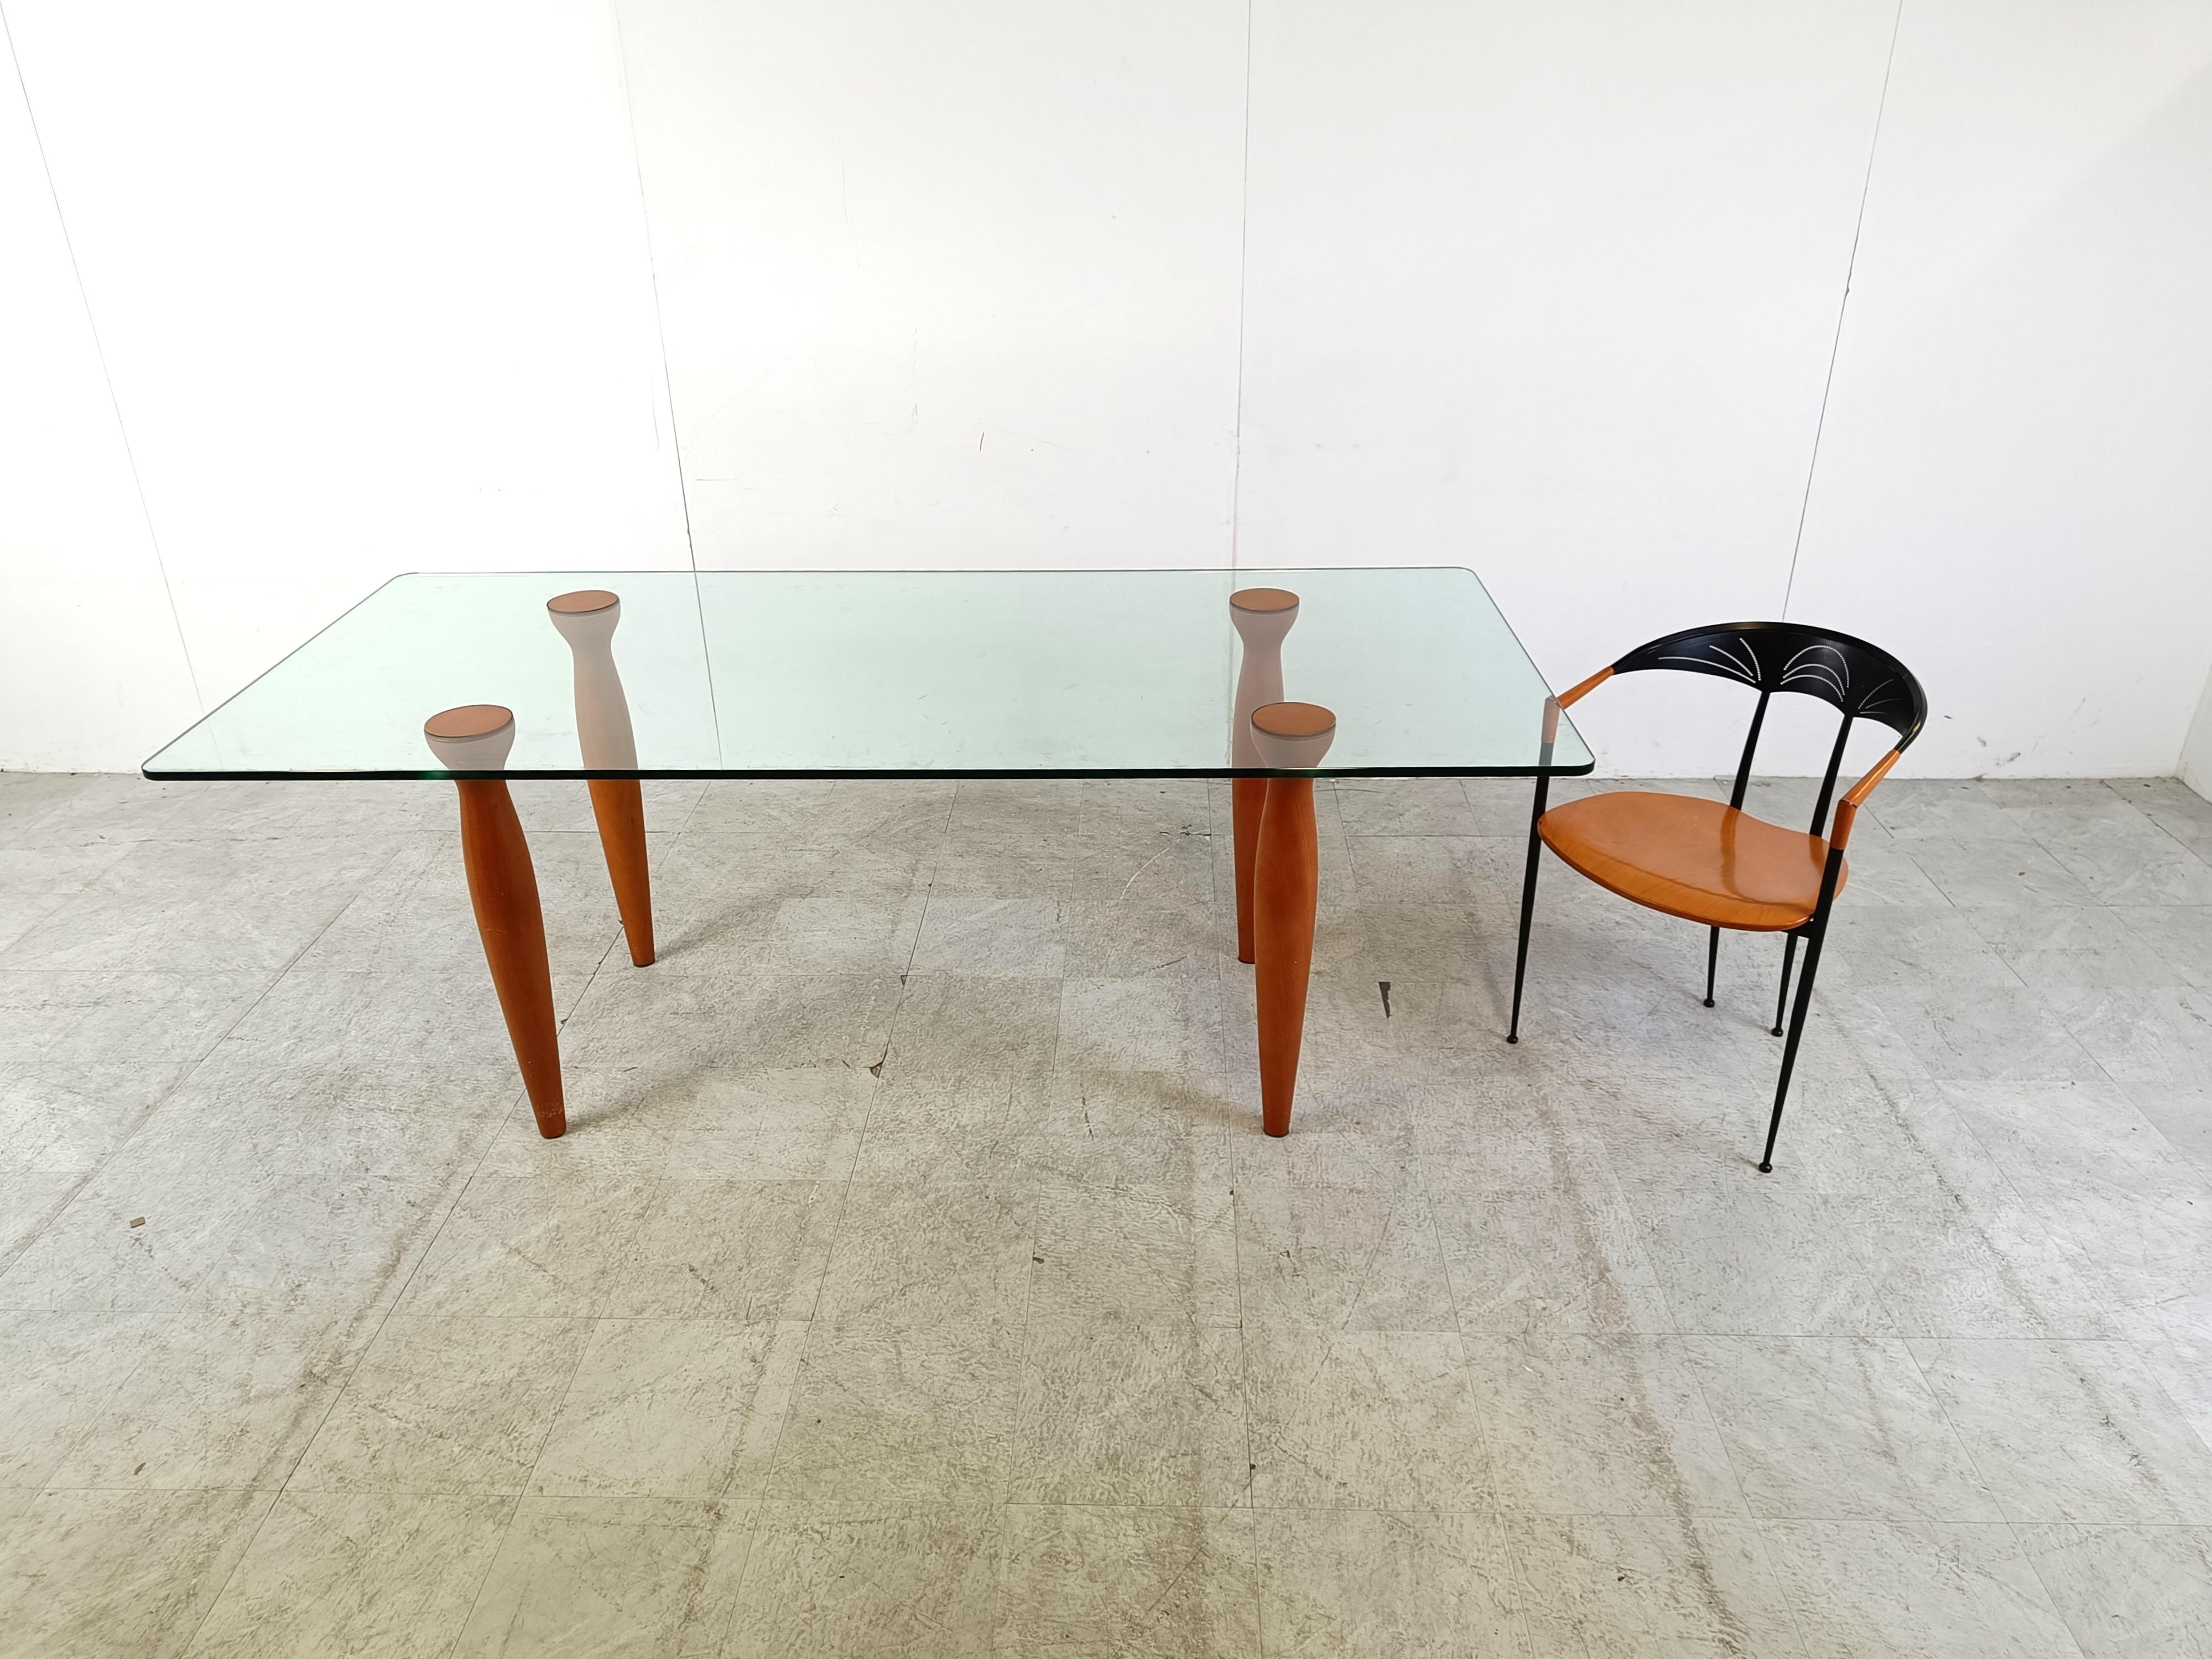 1990s italian design dining table consisting of a clear glass rectangular top with 4 elegant sculpted wooden legs. 

The legs interlock with the glass.

Good condition.

1990s - Italy

Dimensions:
Height: 75cm/29.52